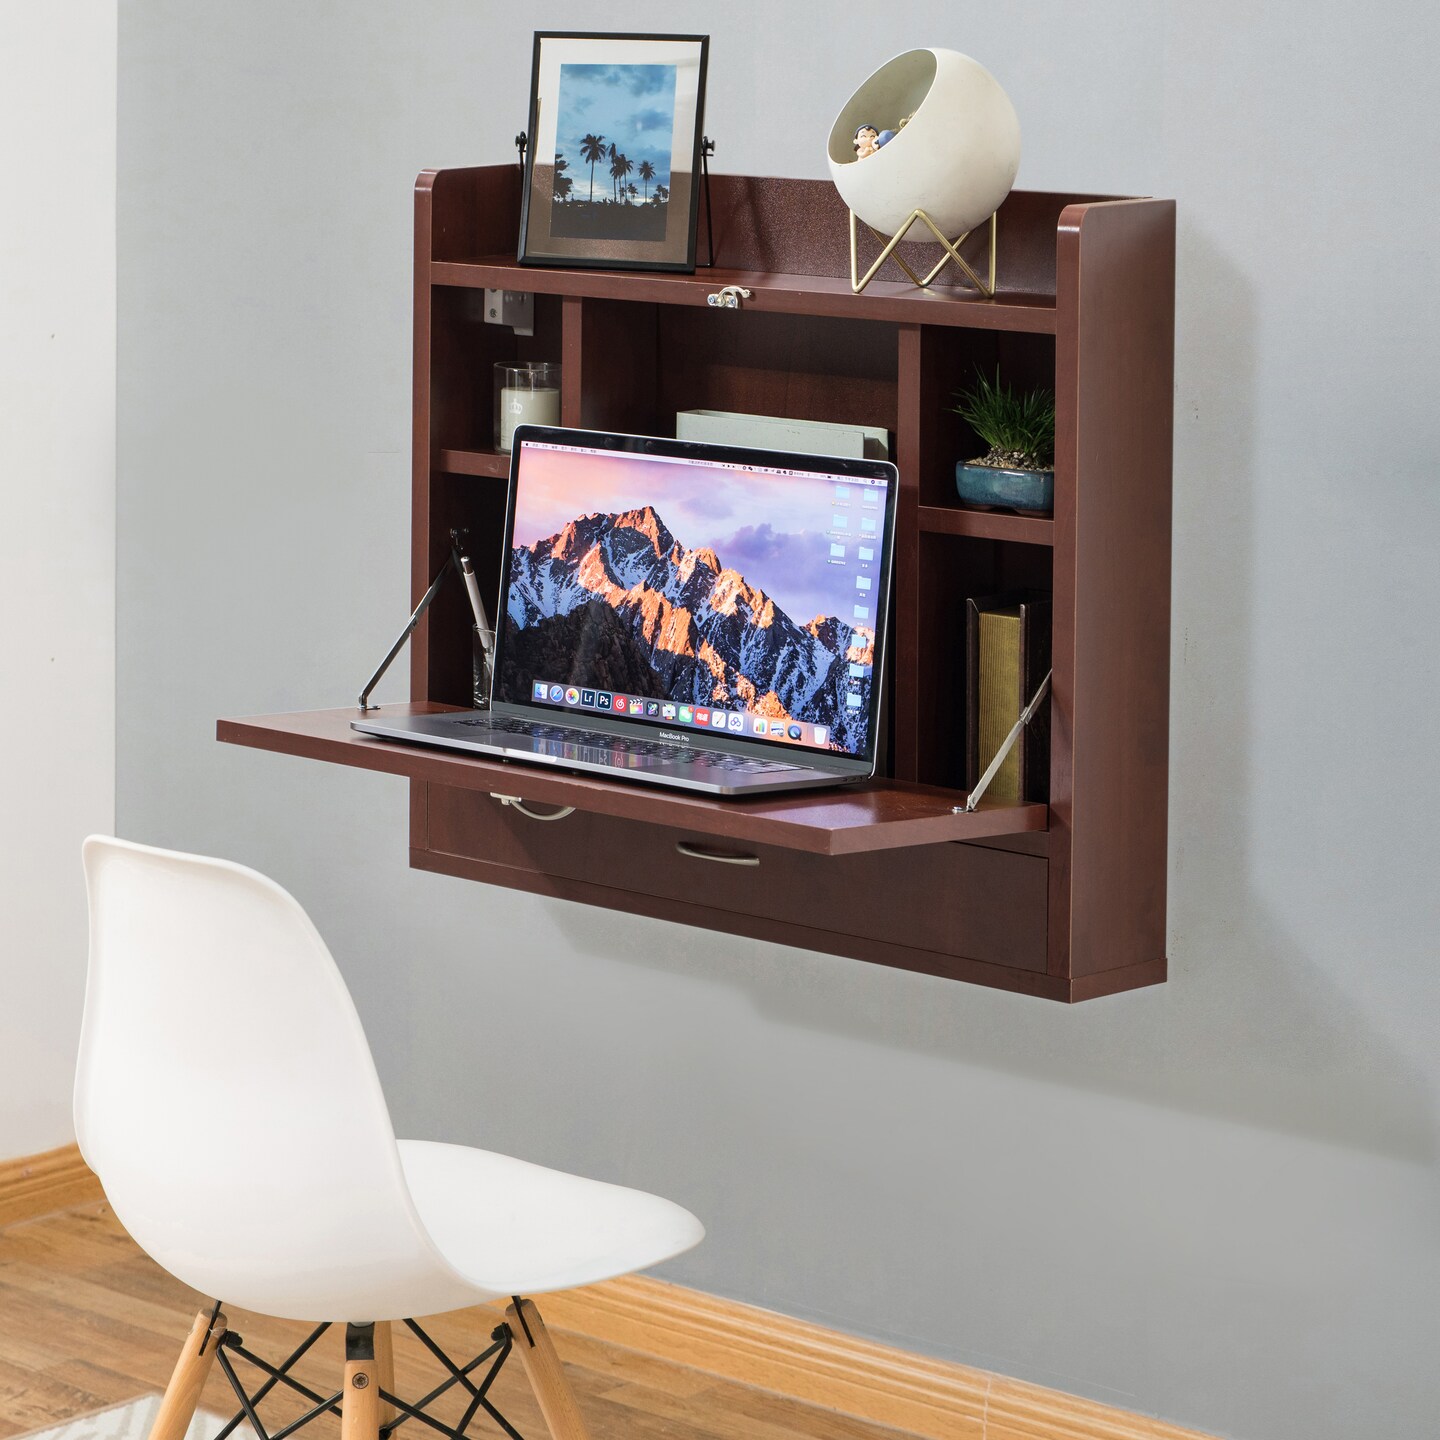 Wall Mount Folding Laptop Writing Computer or Makeup Desk with Storage Shelves and Drawer